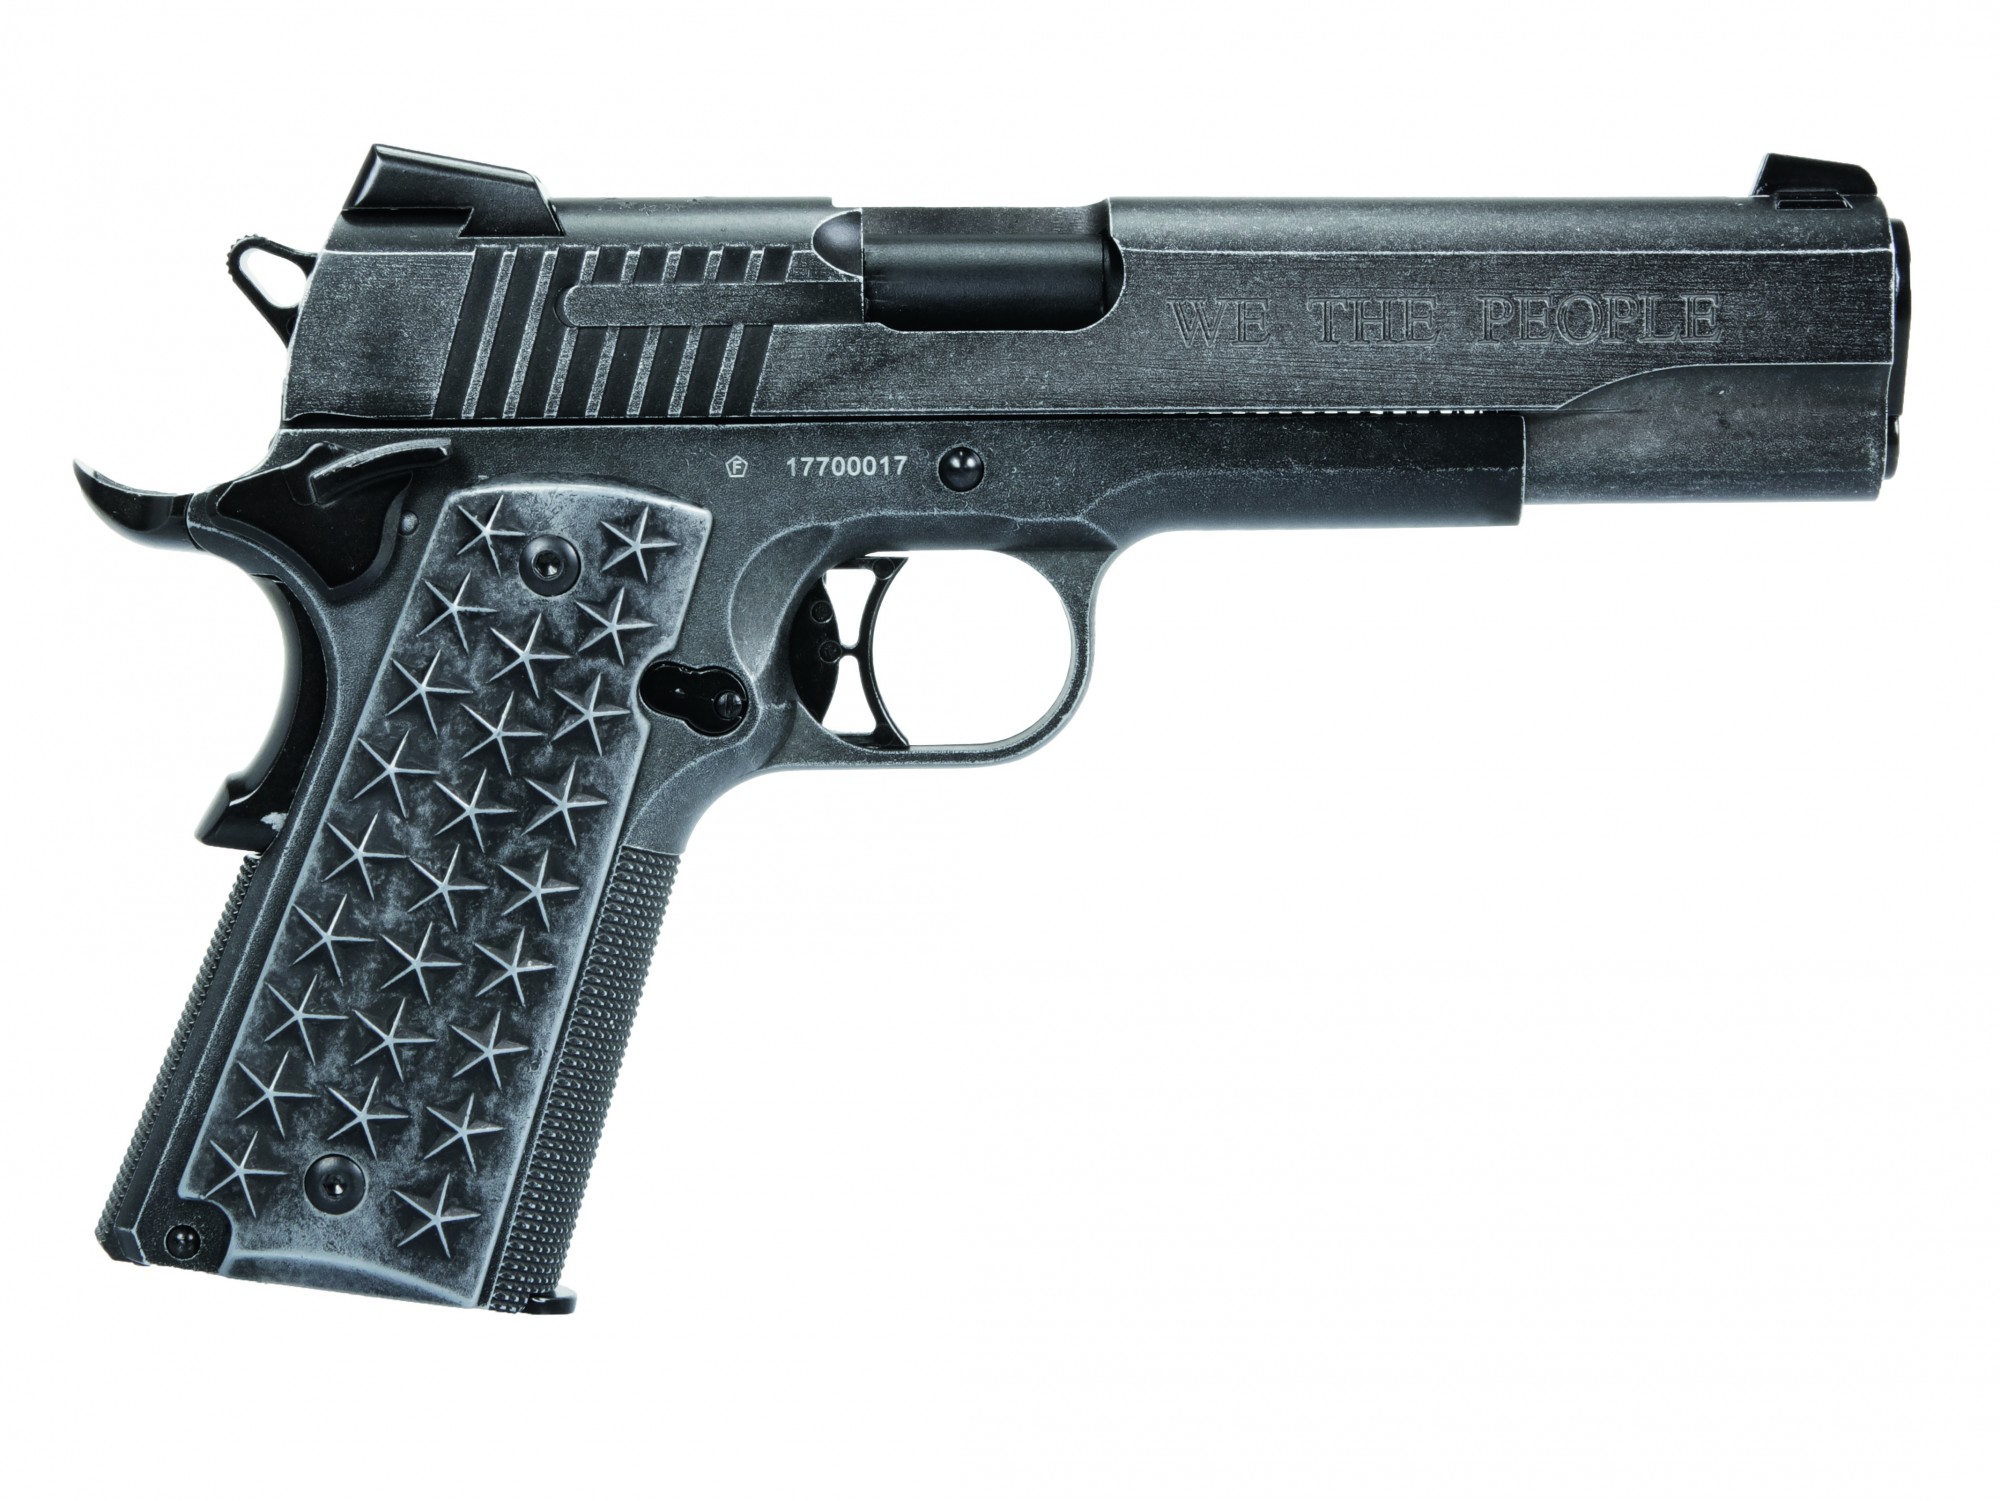 Sig Sauer 1911 "We The People" 4,5mm CO2 Blowback